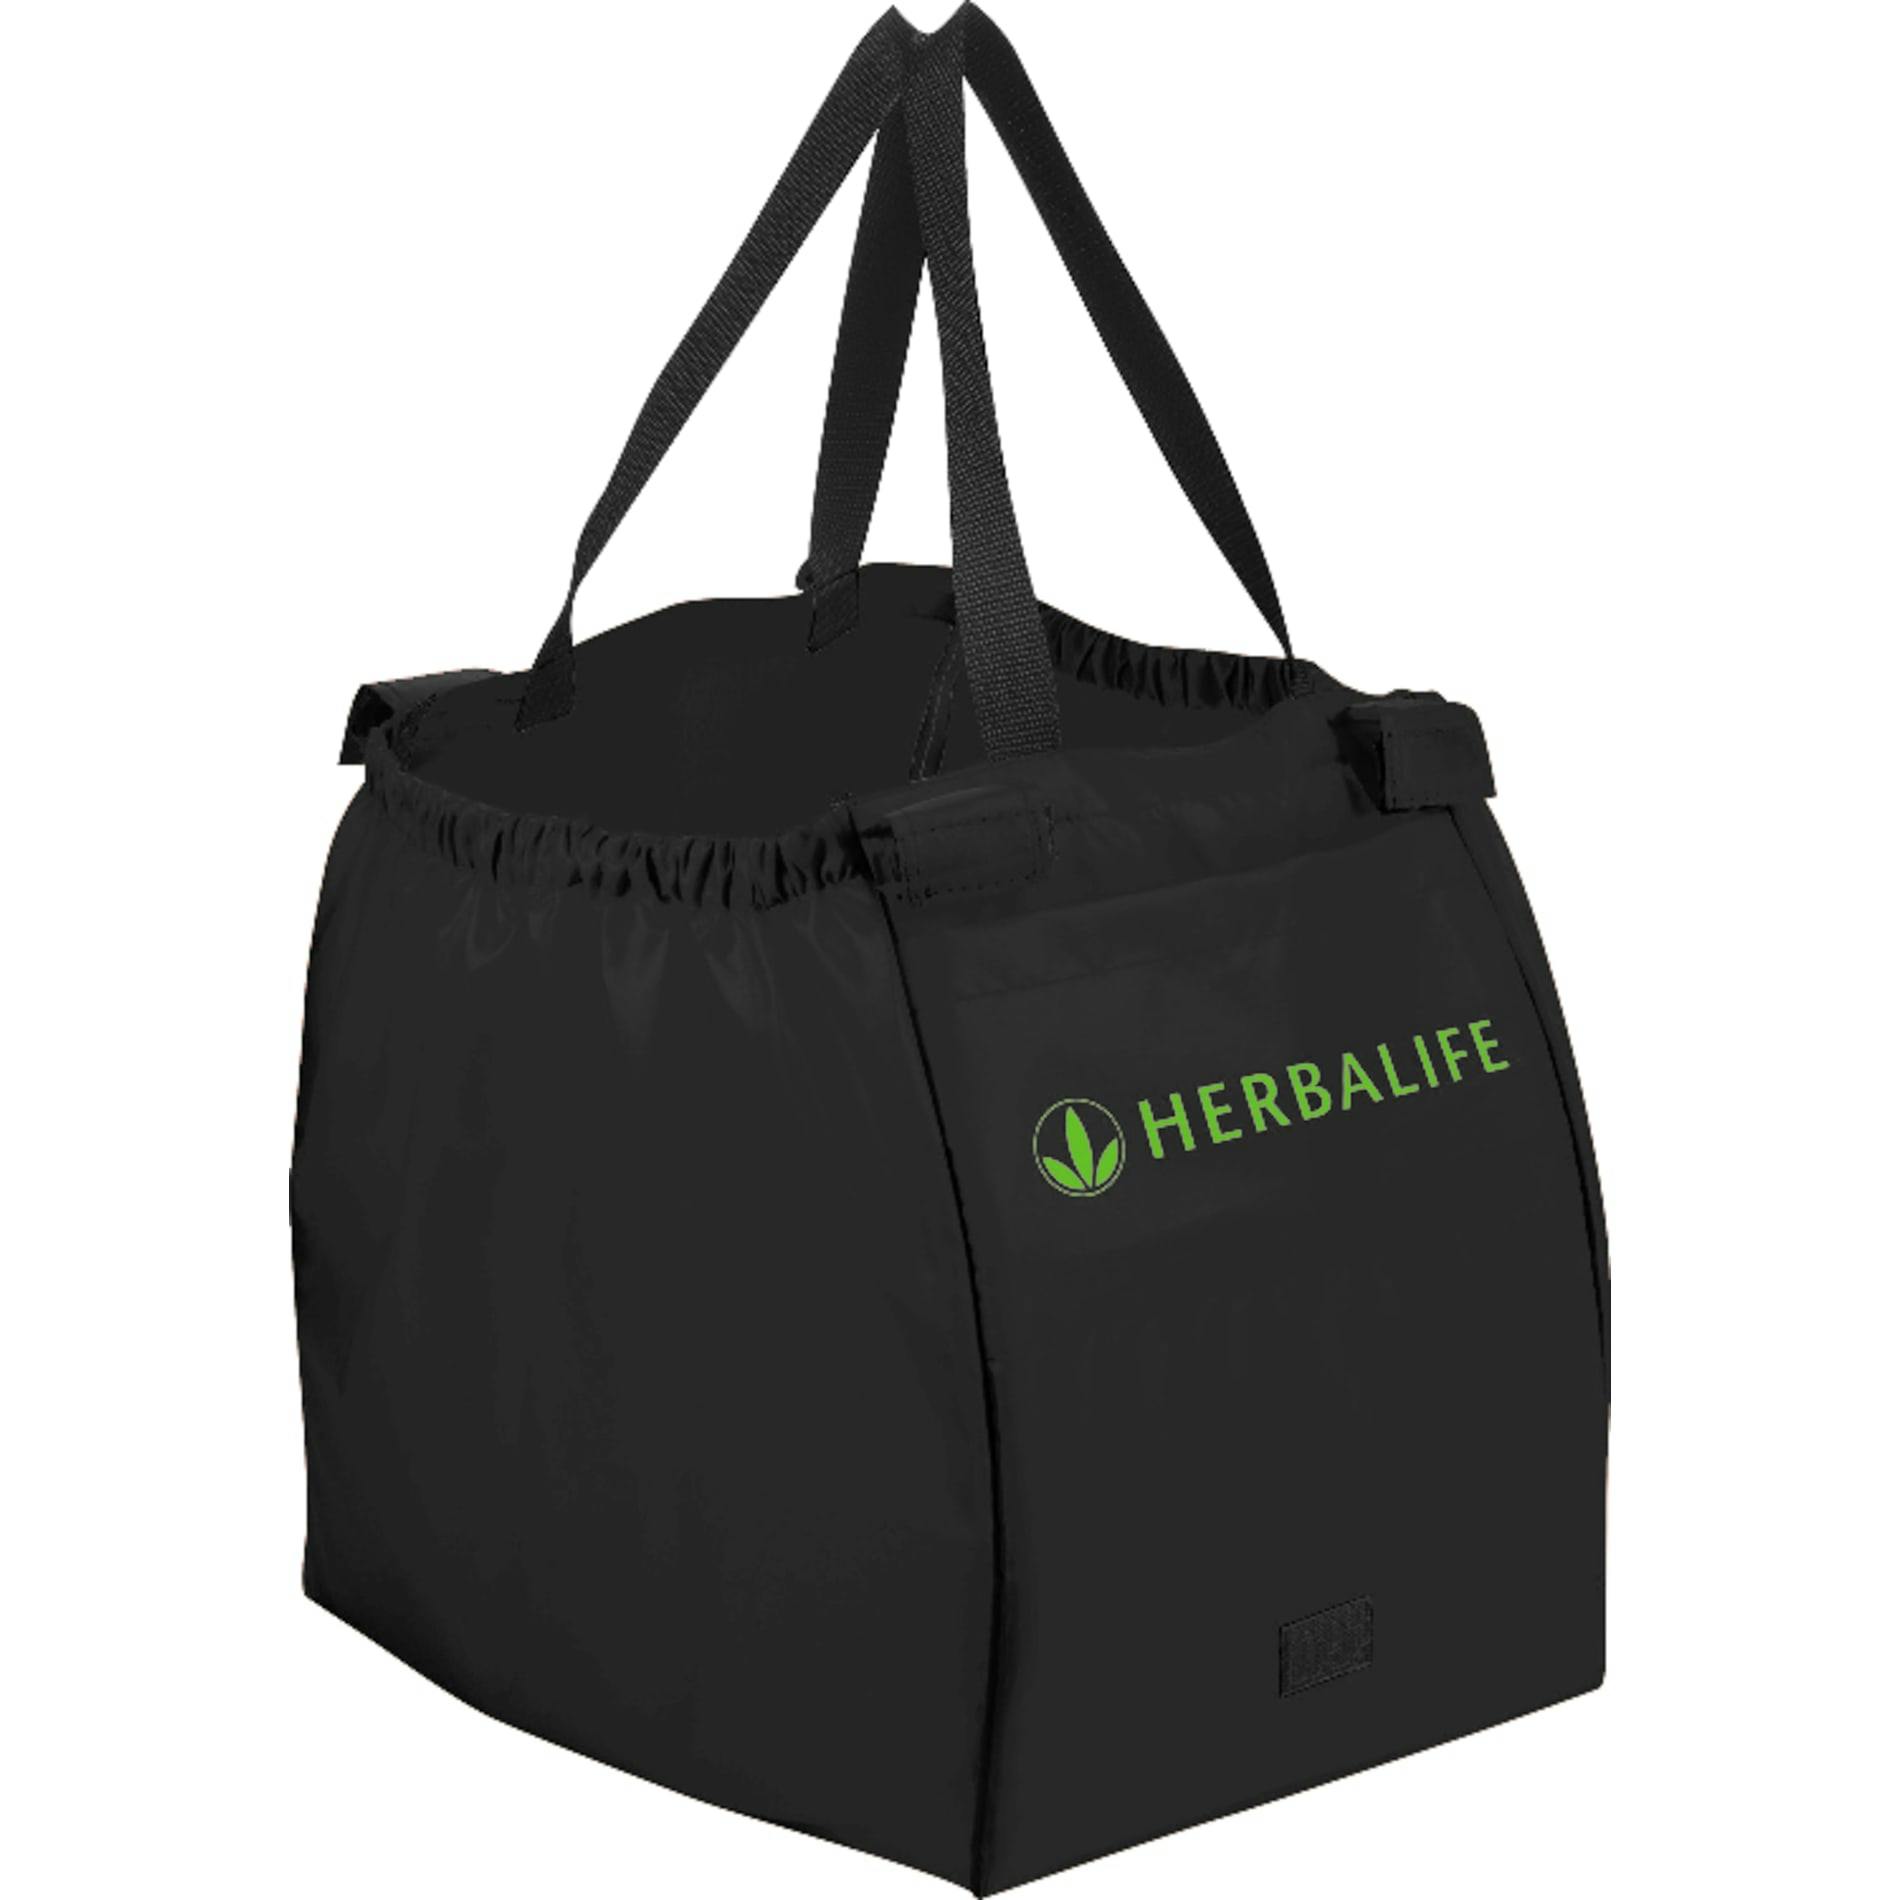 Over The Cart Grocery Tote - additional Image 4